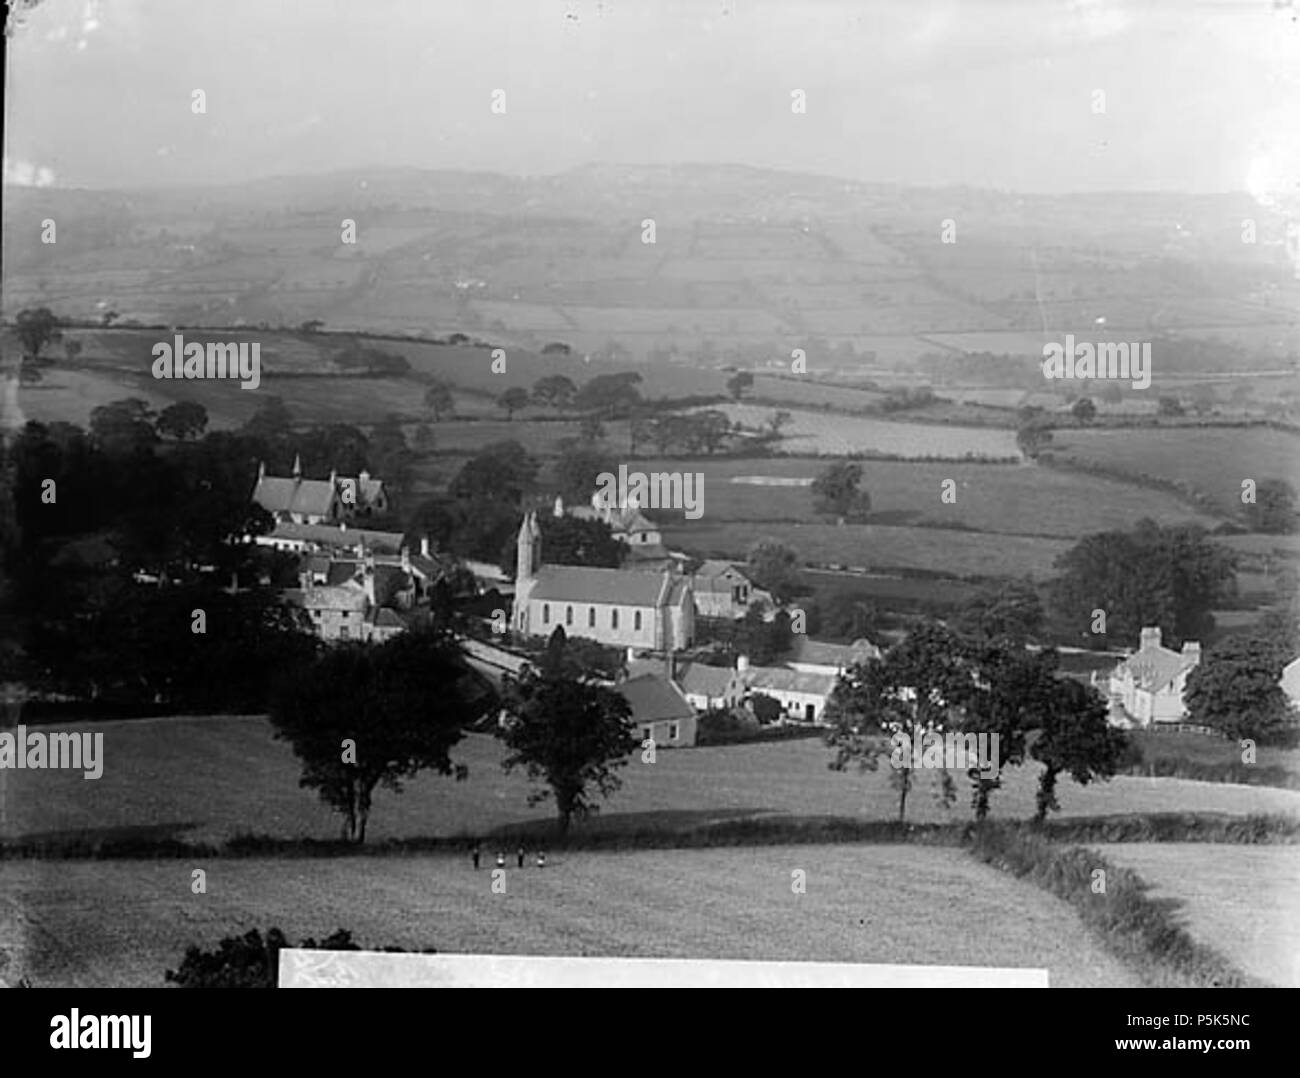 [A view of Betws-yn-Rhos from the hill] [graphic].. 1 negative : glass, dry plate, b&w ; 16.5 x 21.5 cm. circa 1885. Thomas, John, 47 A view of Betws-yn-Rhos from the hill NLW3361270 Stock Photo